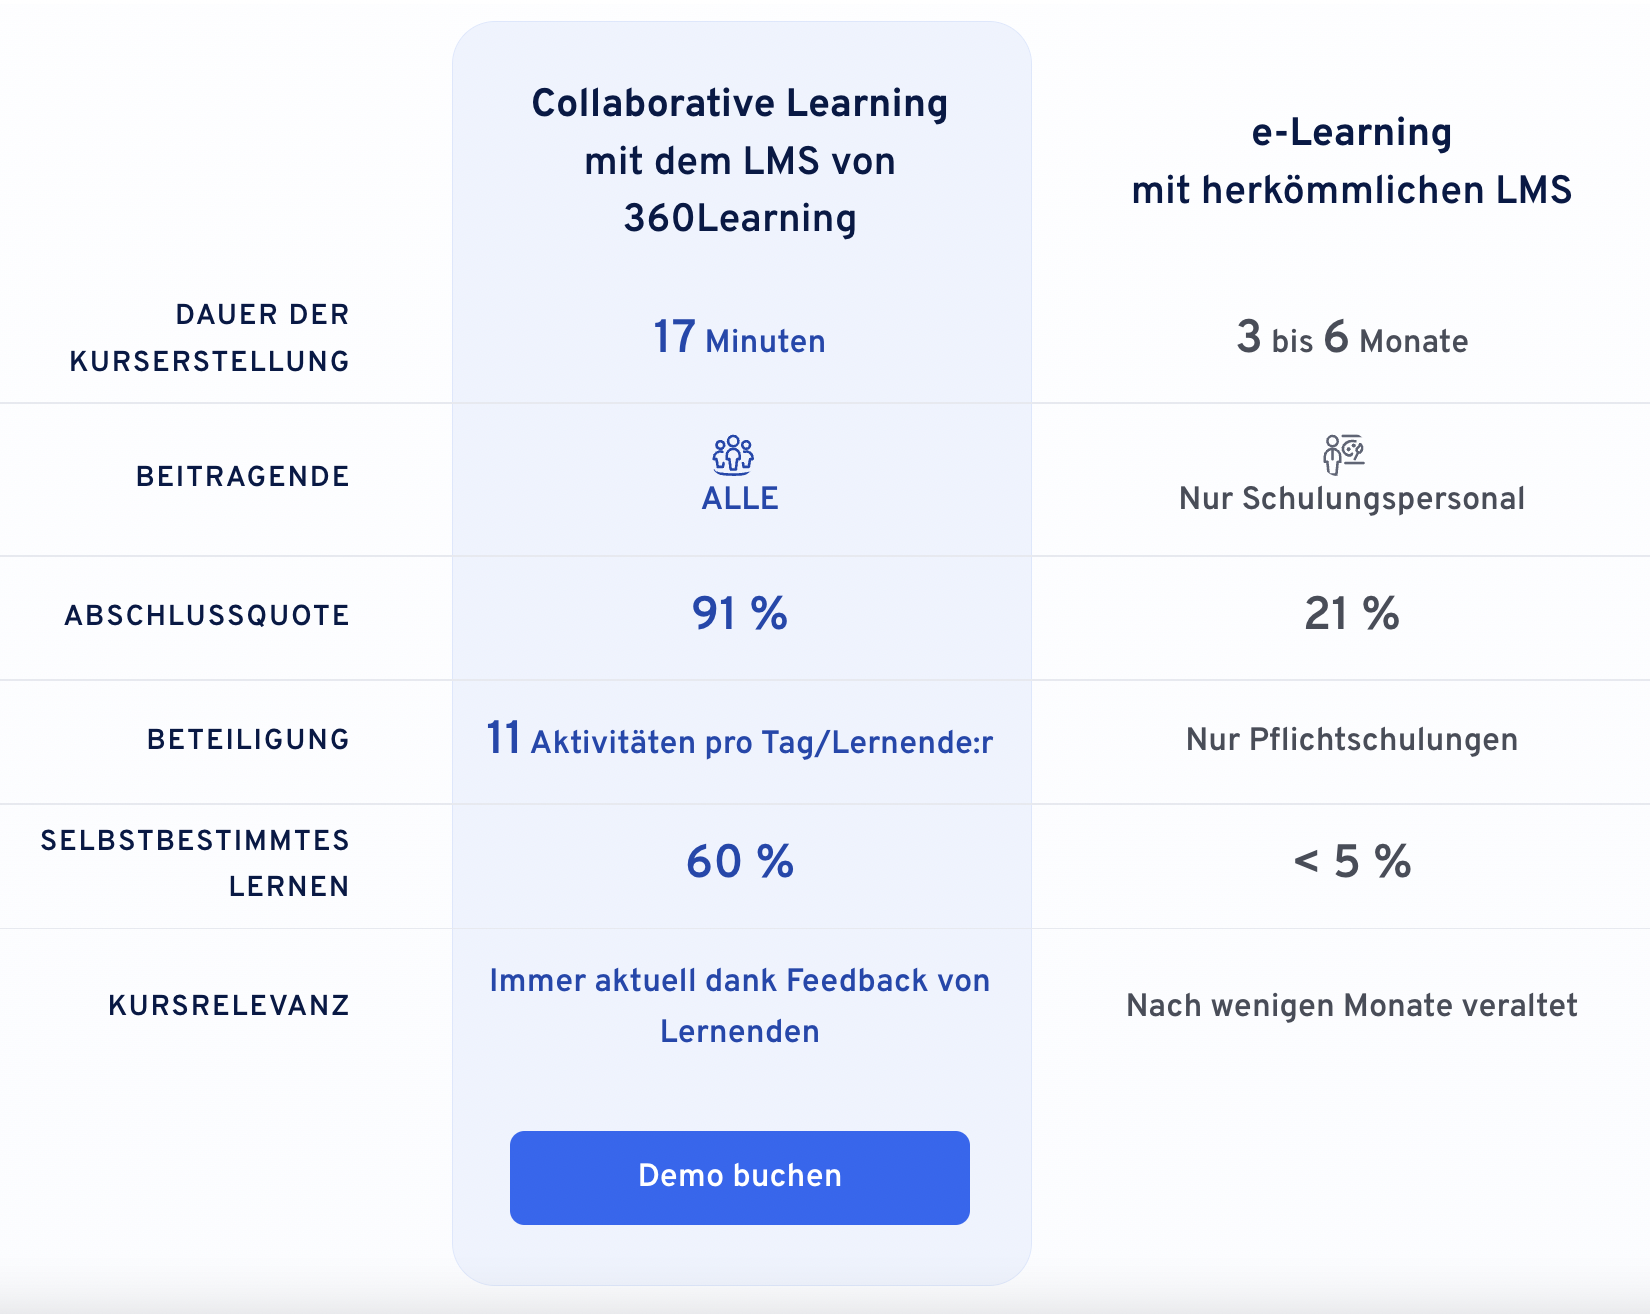 lms mit collaborative learning | 360Learning